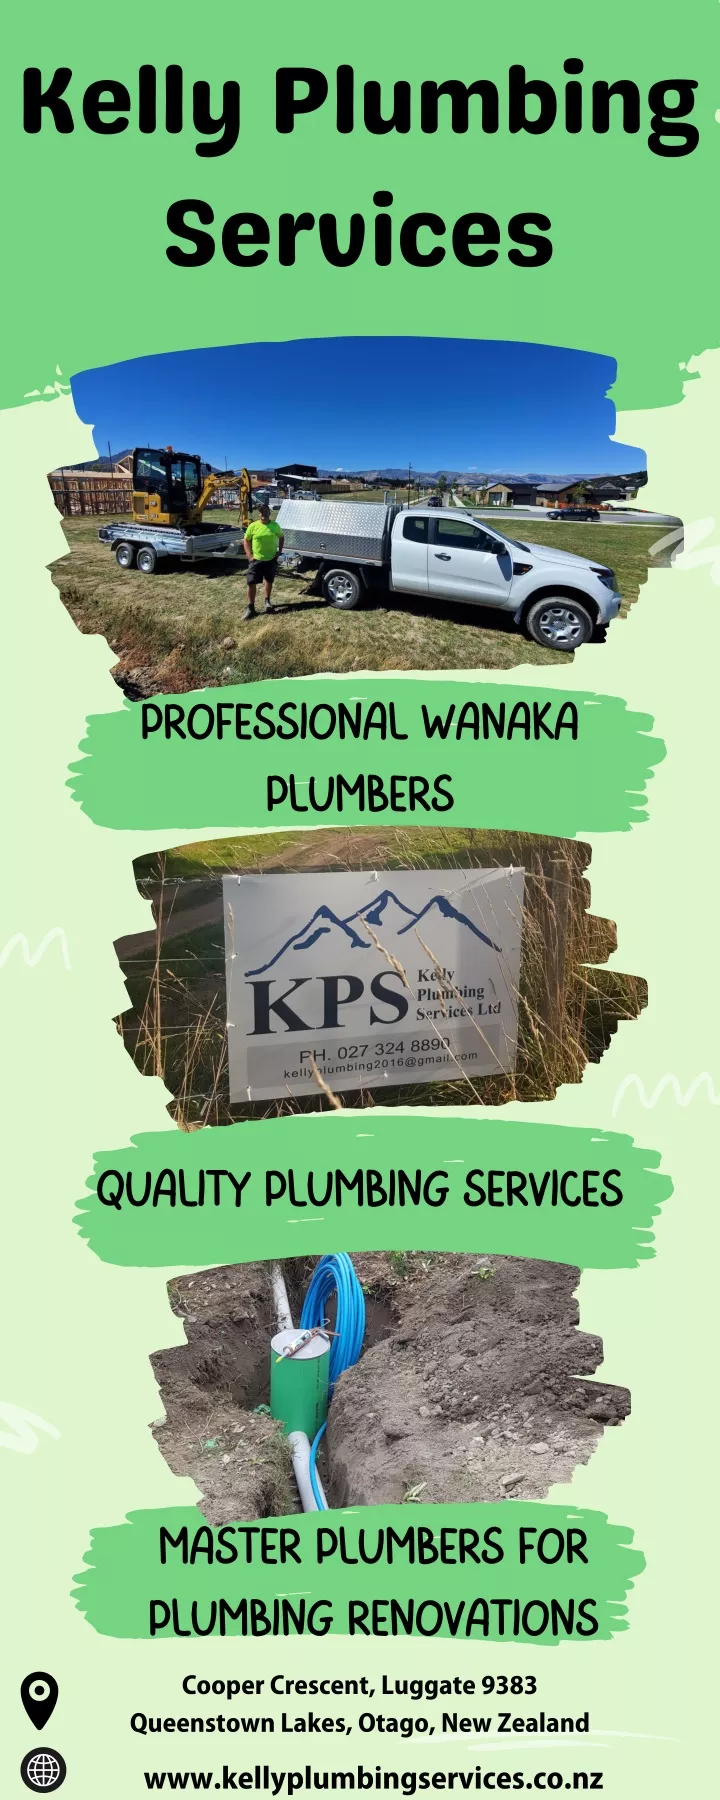 kelly plumbing services